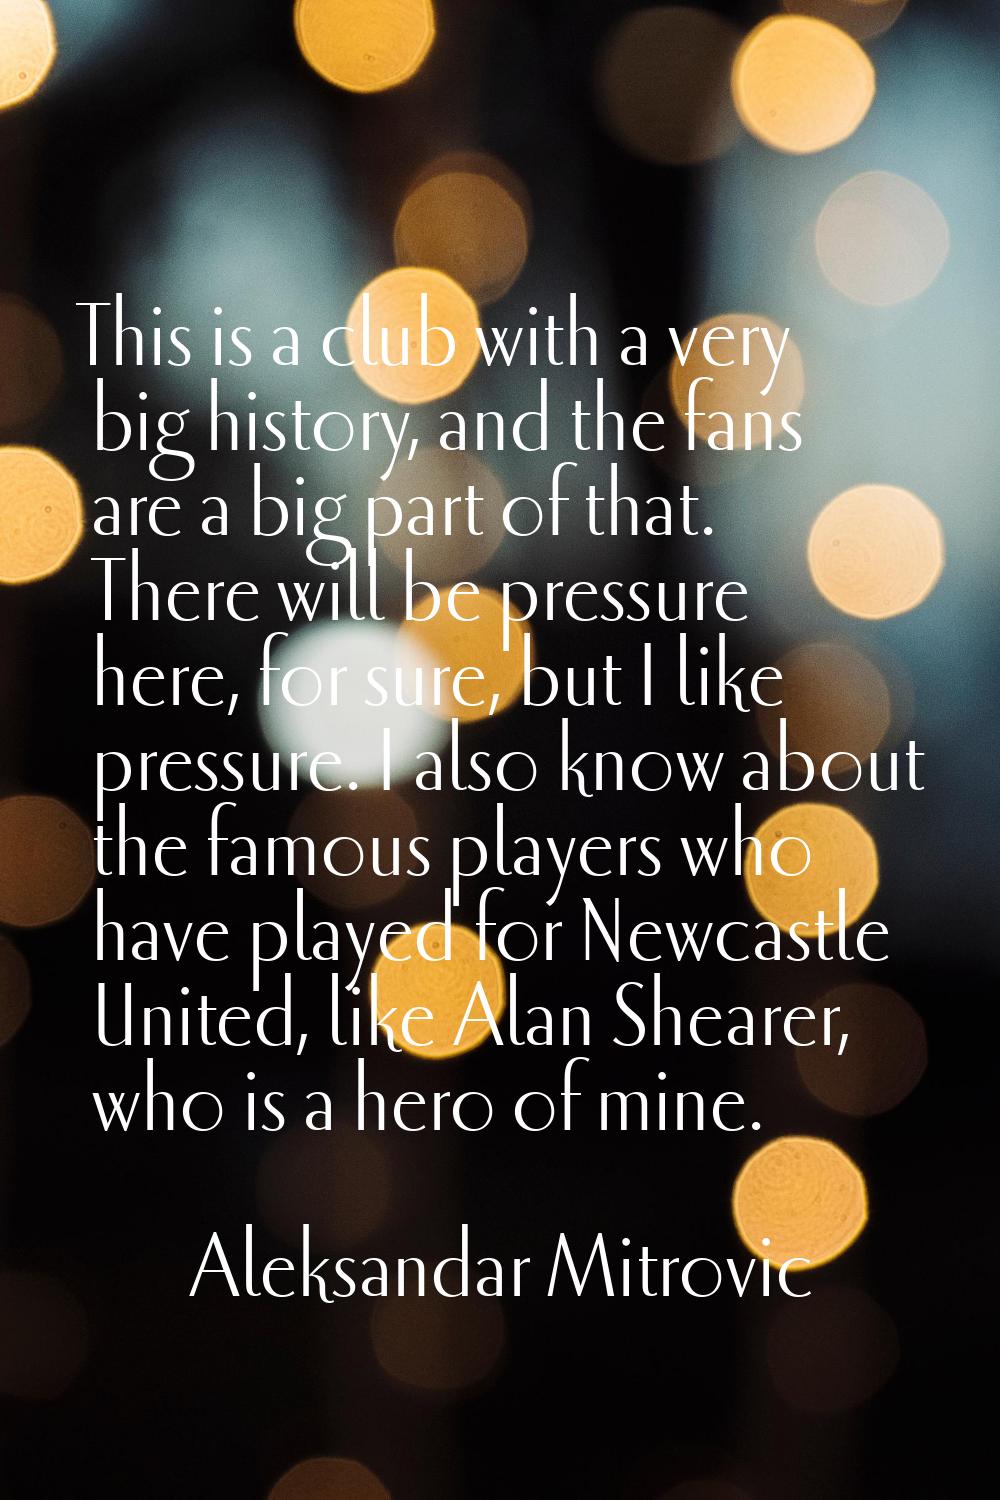 This is a club with a very big history, and the fans are a big part of that. There will be pressure